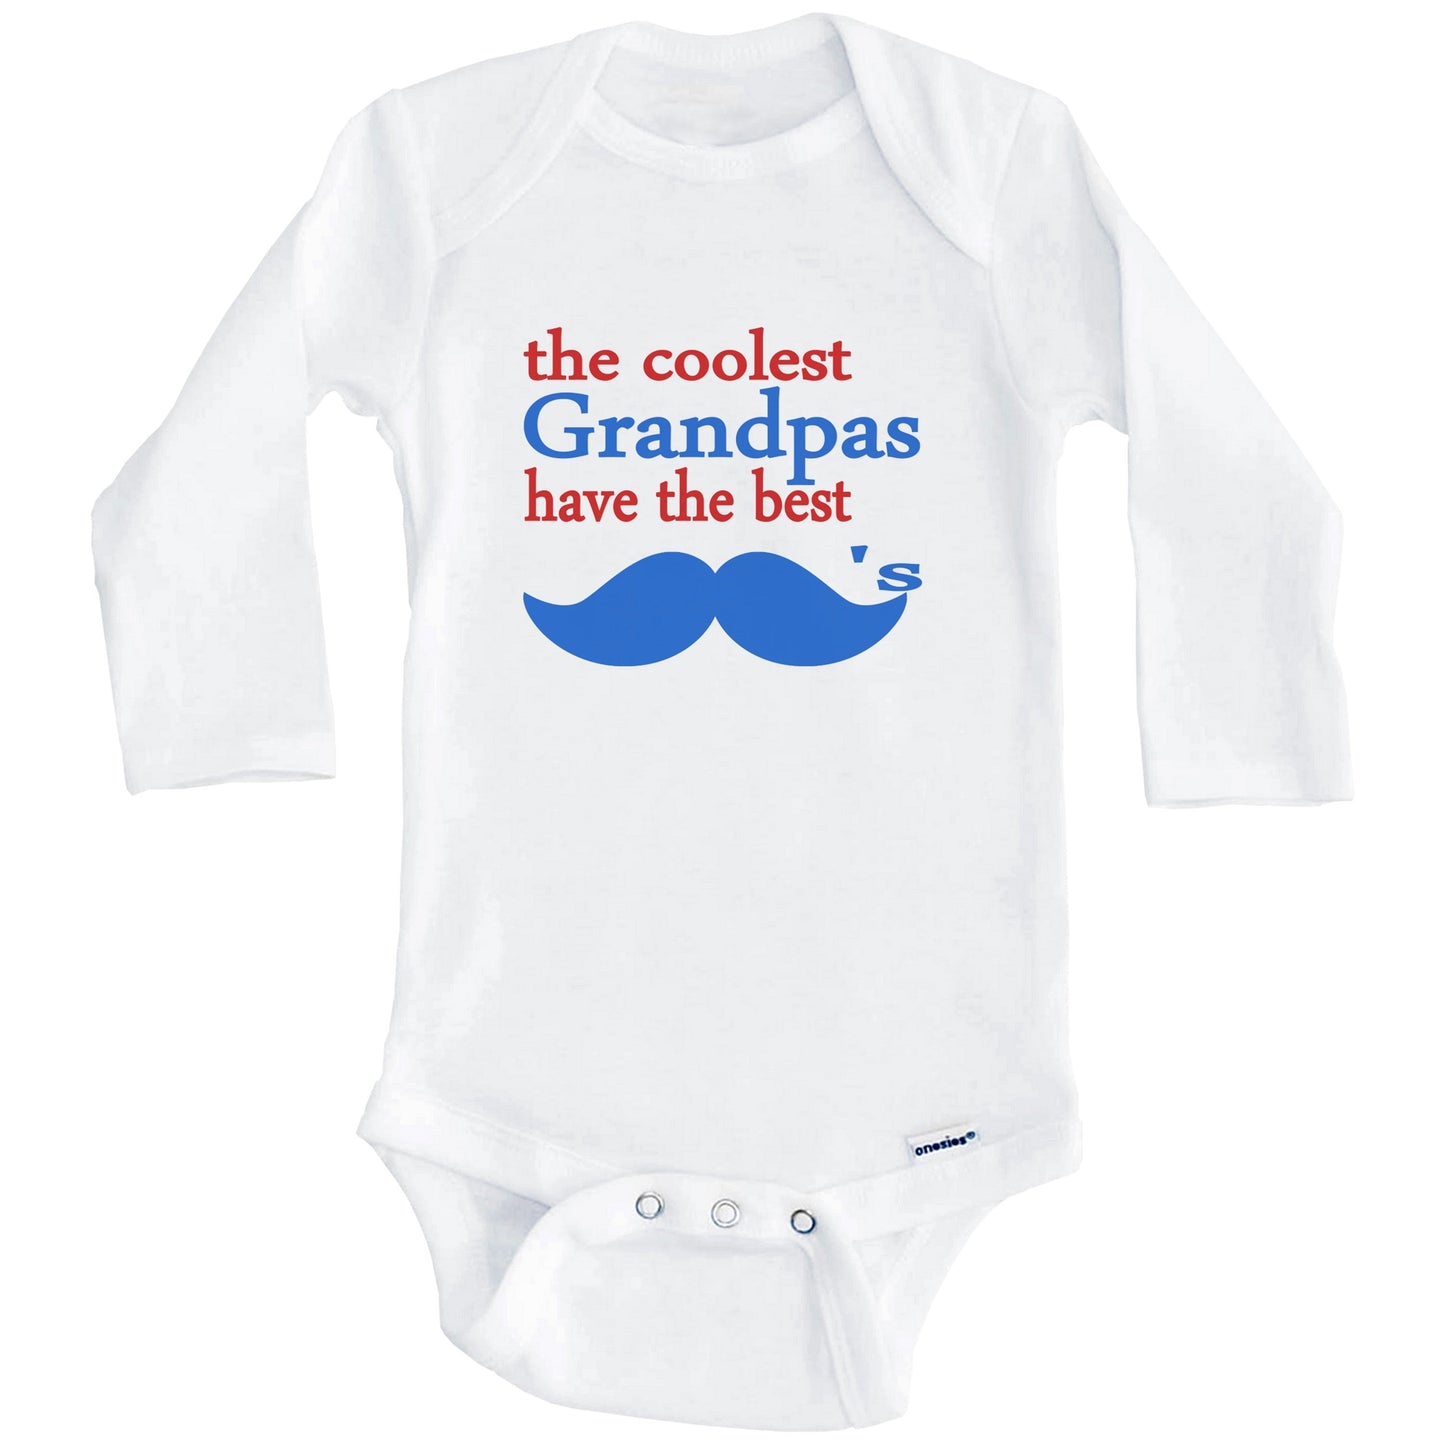 The Coolest Grandpas Have The Best Mustaches Onesie - Funny Baby Bodysuit (Long Sleeves)